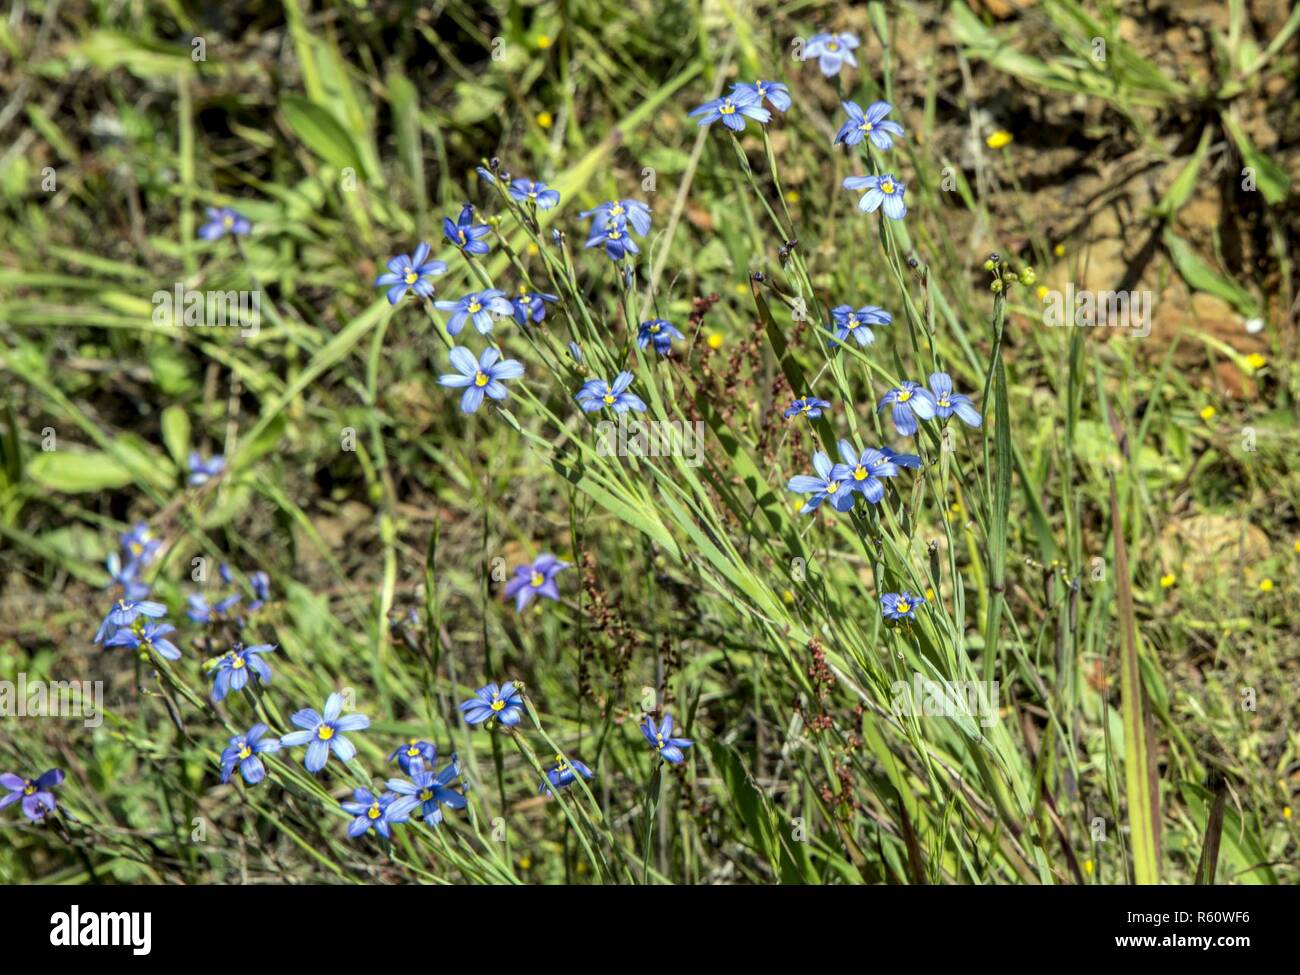 Sisyrinchium or blue-eyed grass a large genus of annual to perennial plants of the iris family, and a California native plant, grows at the edge of a vernal pool, Apr. 20, 2017, Travis Air Force Base, Calif. A higher than average rainy season for California has filled ponds and vernal pools on Travis to the brim, bringing back wildflowers that haven’t bloomed in years. Stock Photo